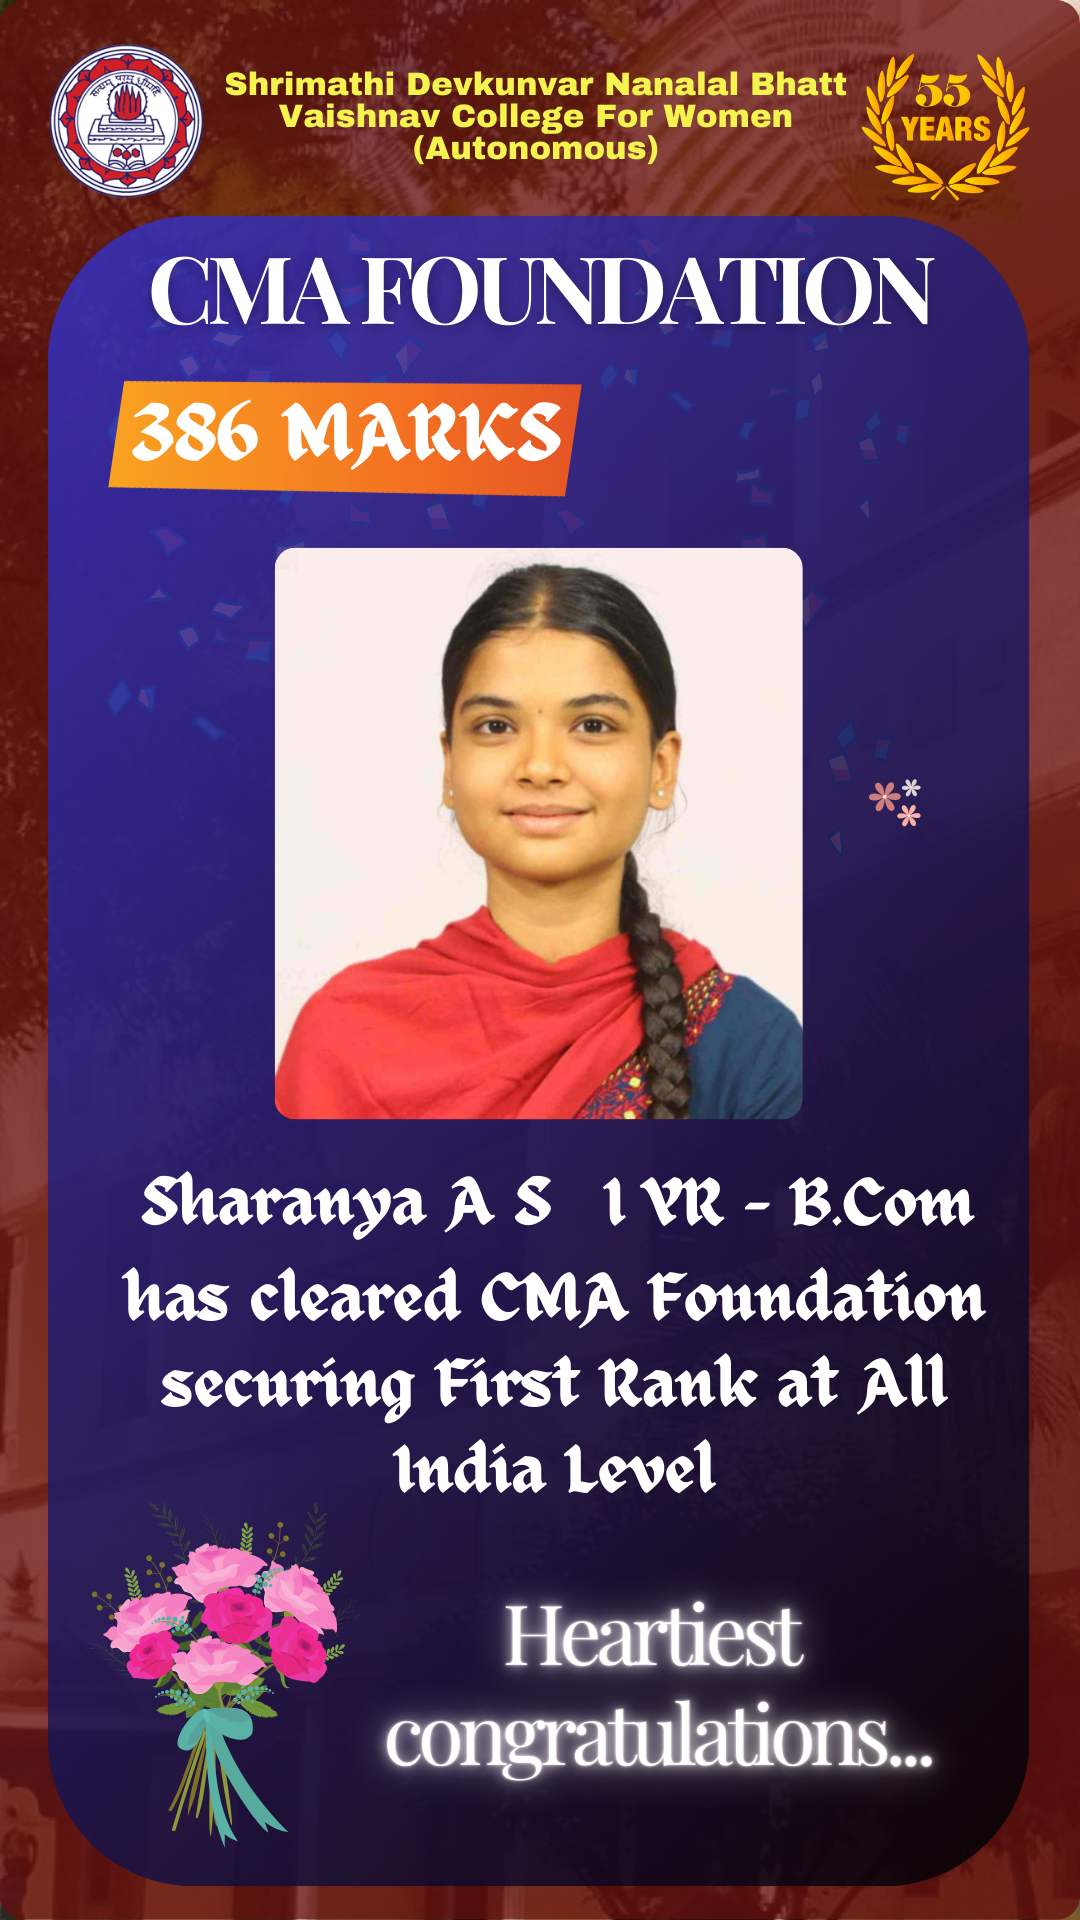 Sharanya A S has cleared CMA Foundation securing First Rank at All India Level